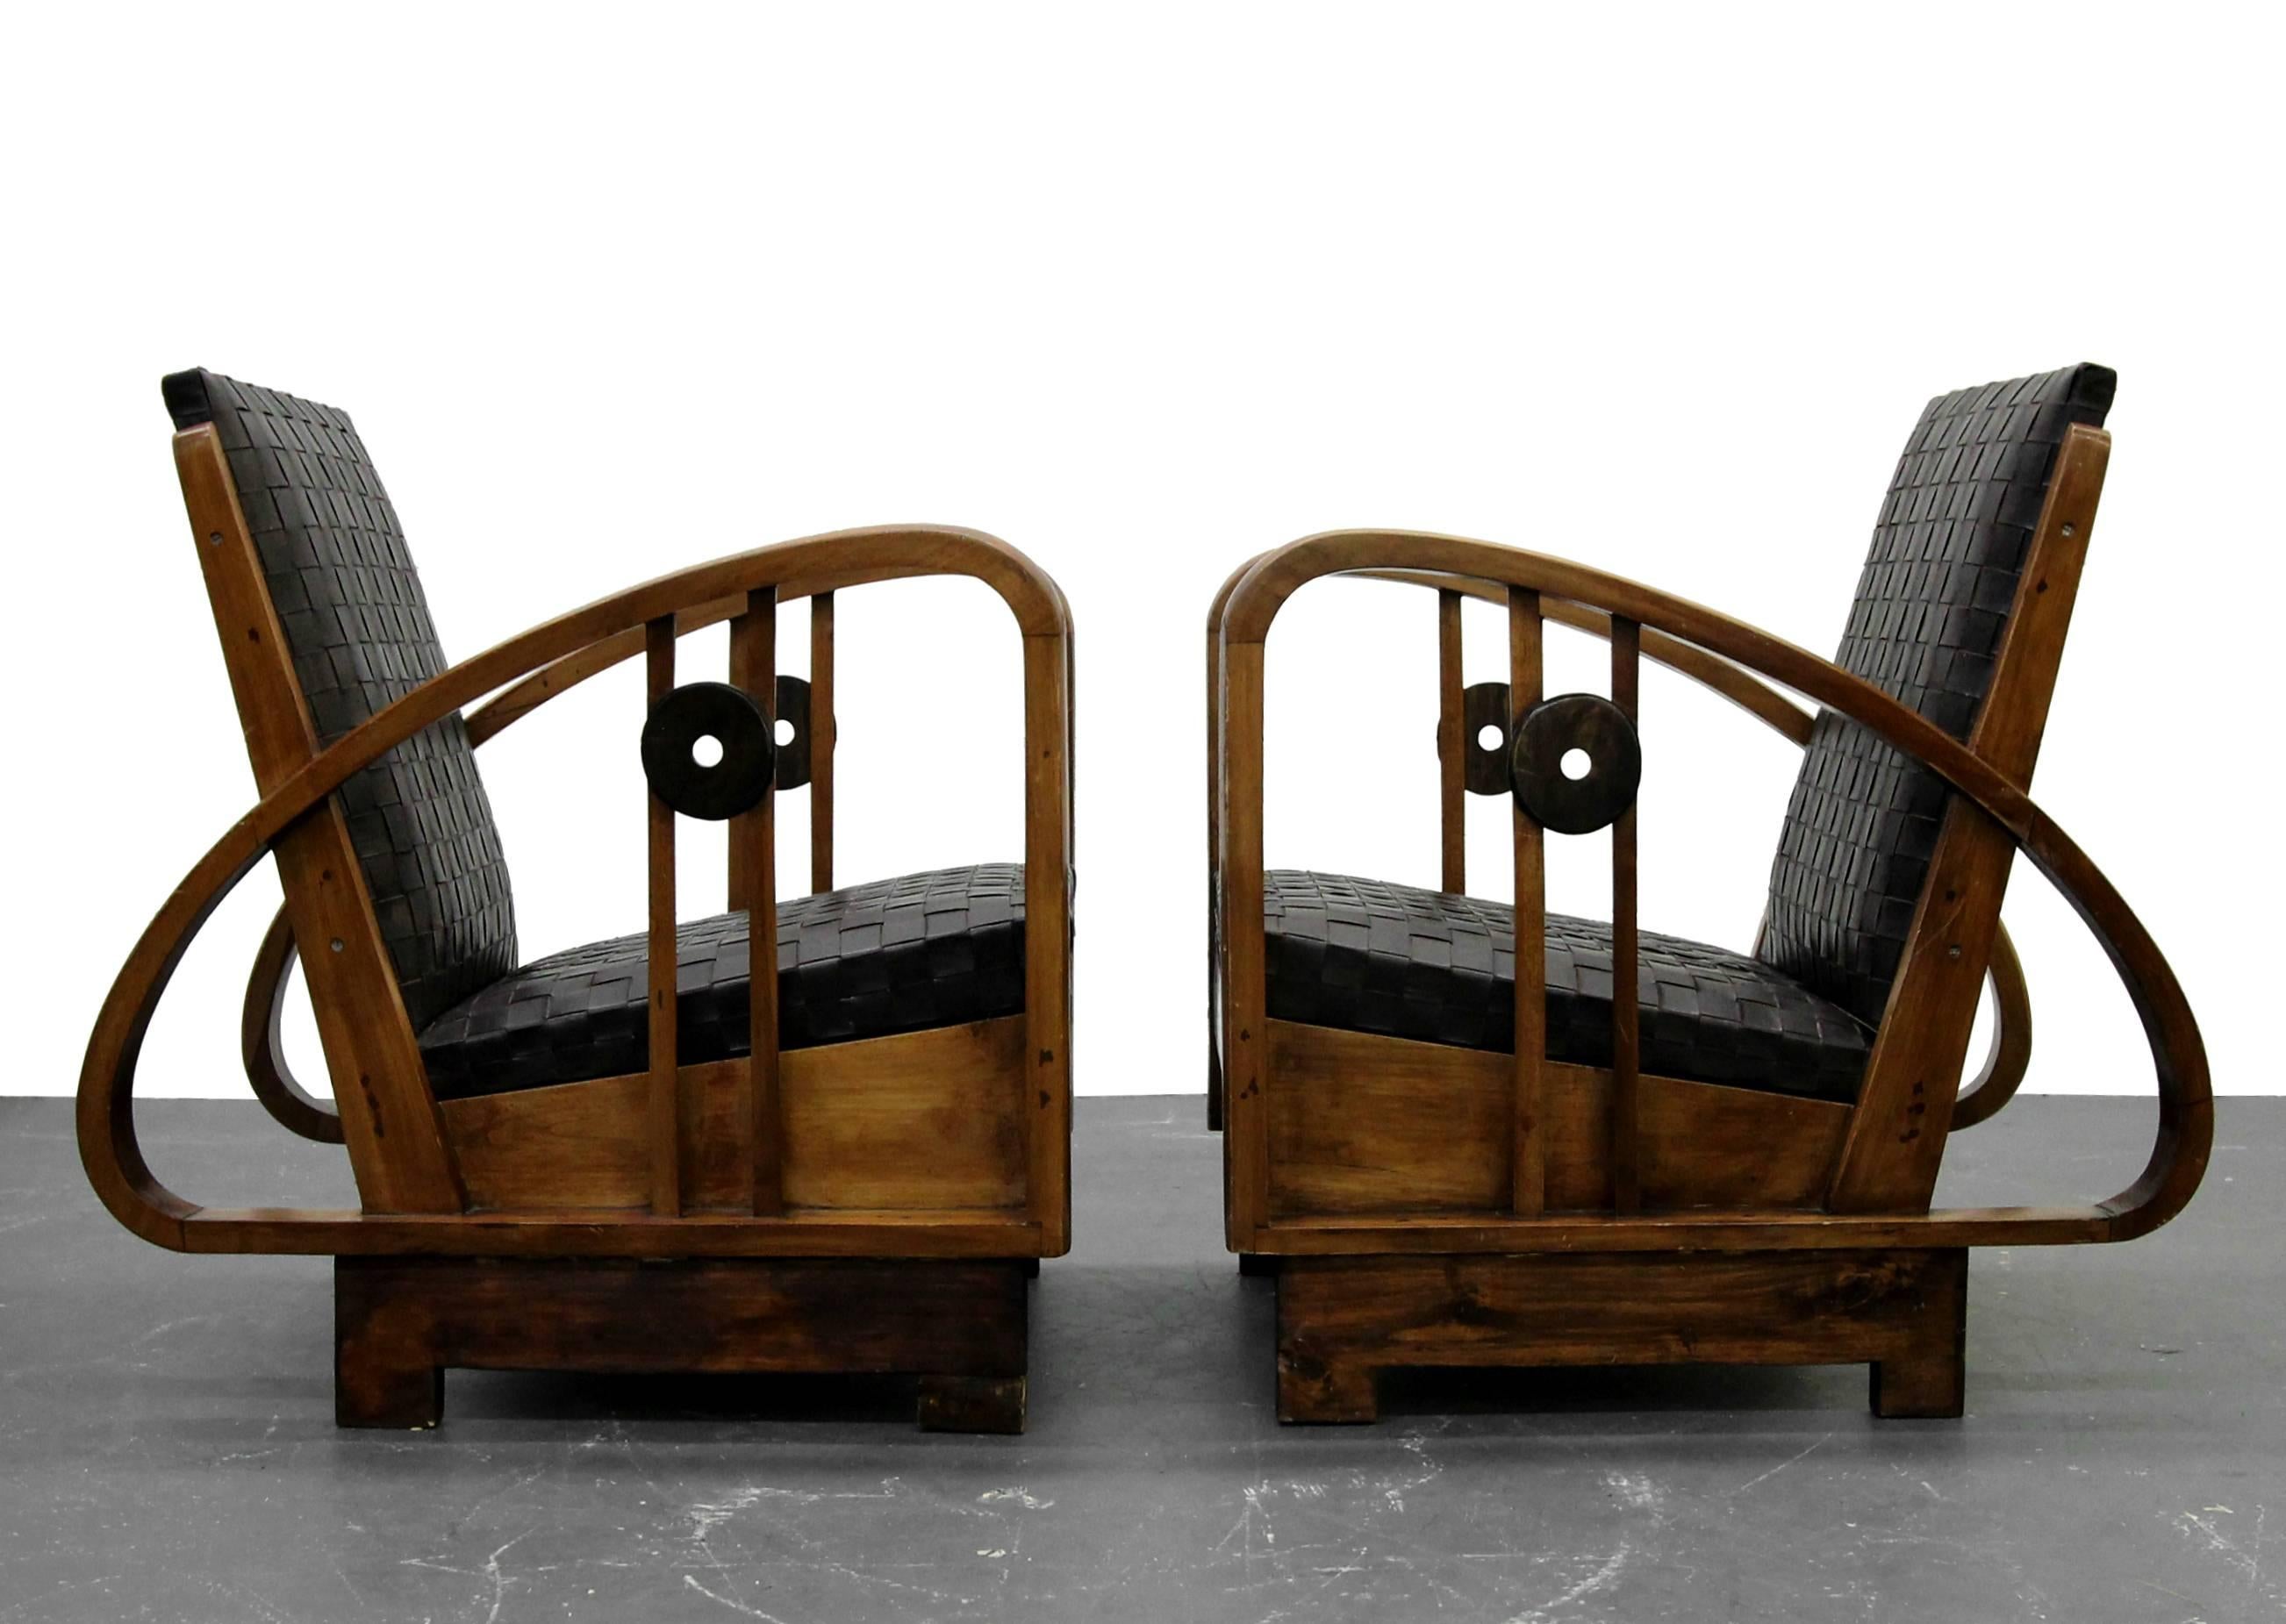 This pair of authentic Art Deco lounge chairs is nothing short of rare and amazing. Petite in size but huge on character and style. These beauties are a site to behold. With all the raw amazing details of furniture of their time combined with rare